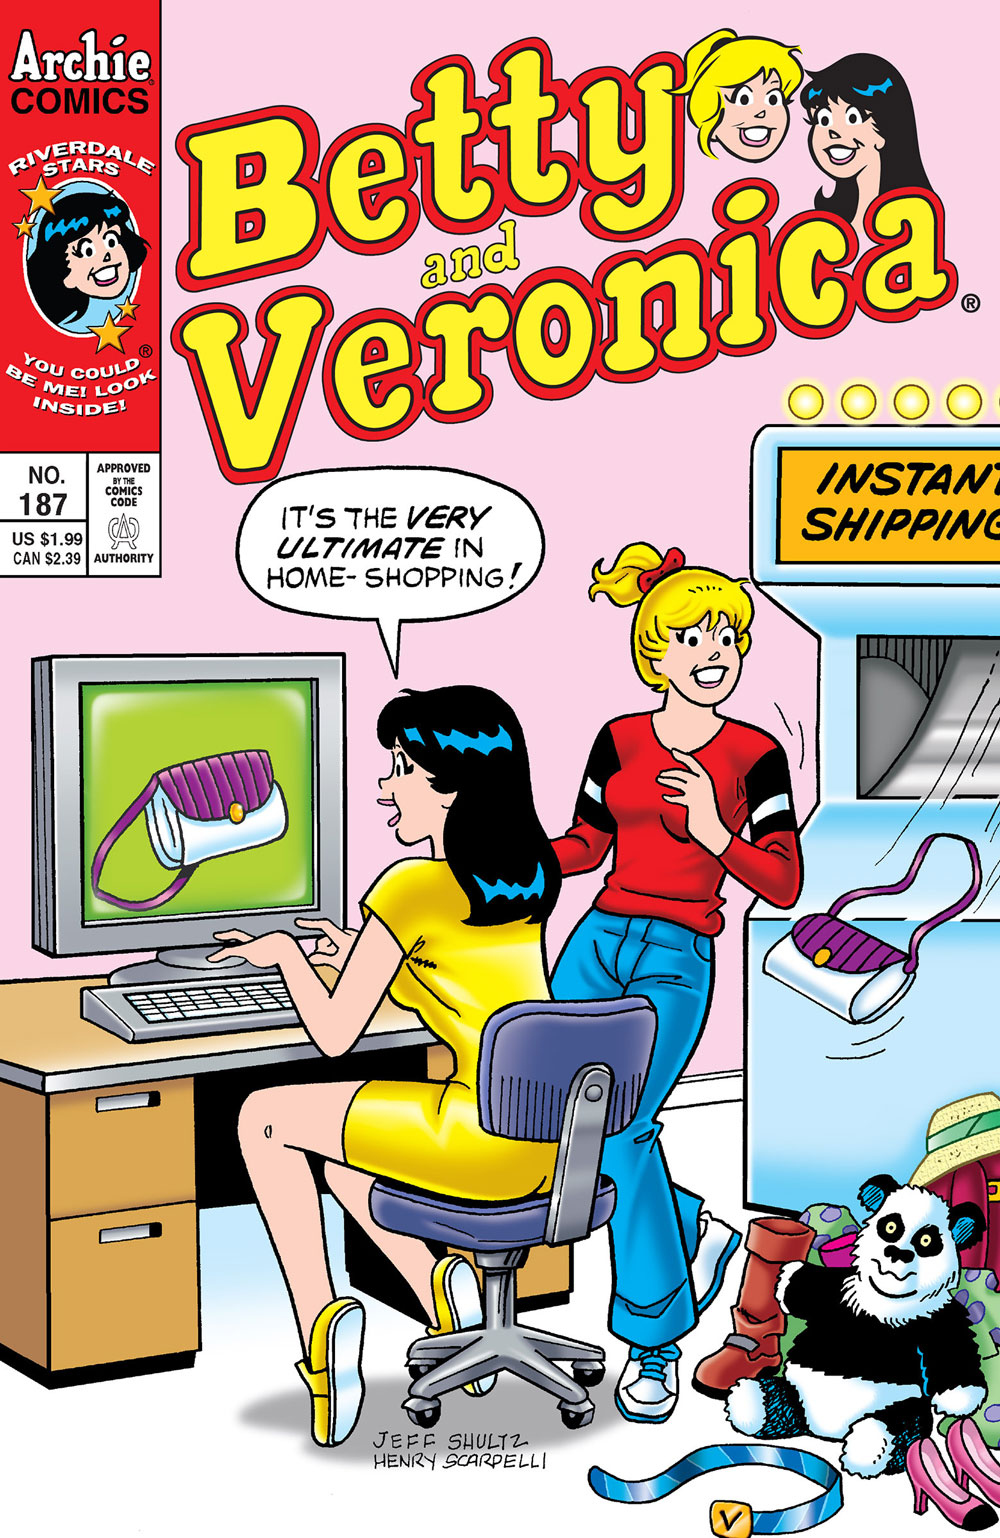 Betty and Veronica are shopping online, and the purse Veronica buys instantly comes to her through a chute with a sign that reads: Instant Shopping. She says it's the ultimate in home shopping.